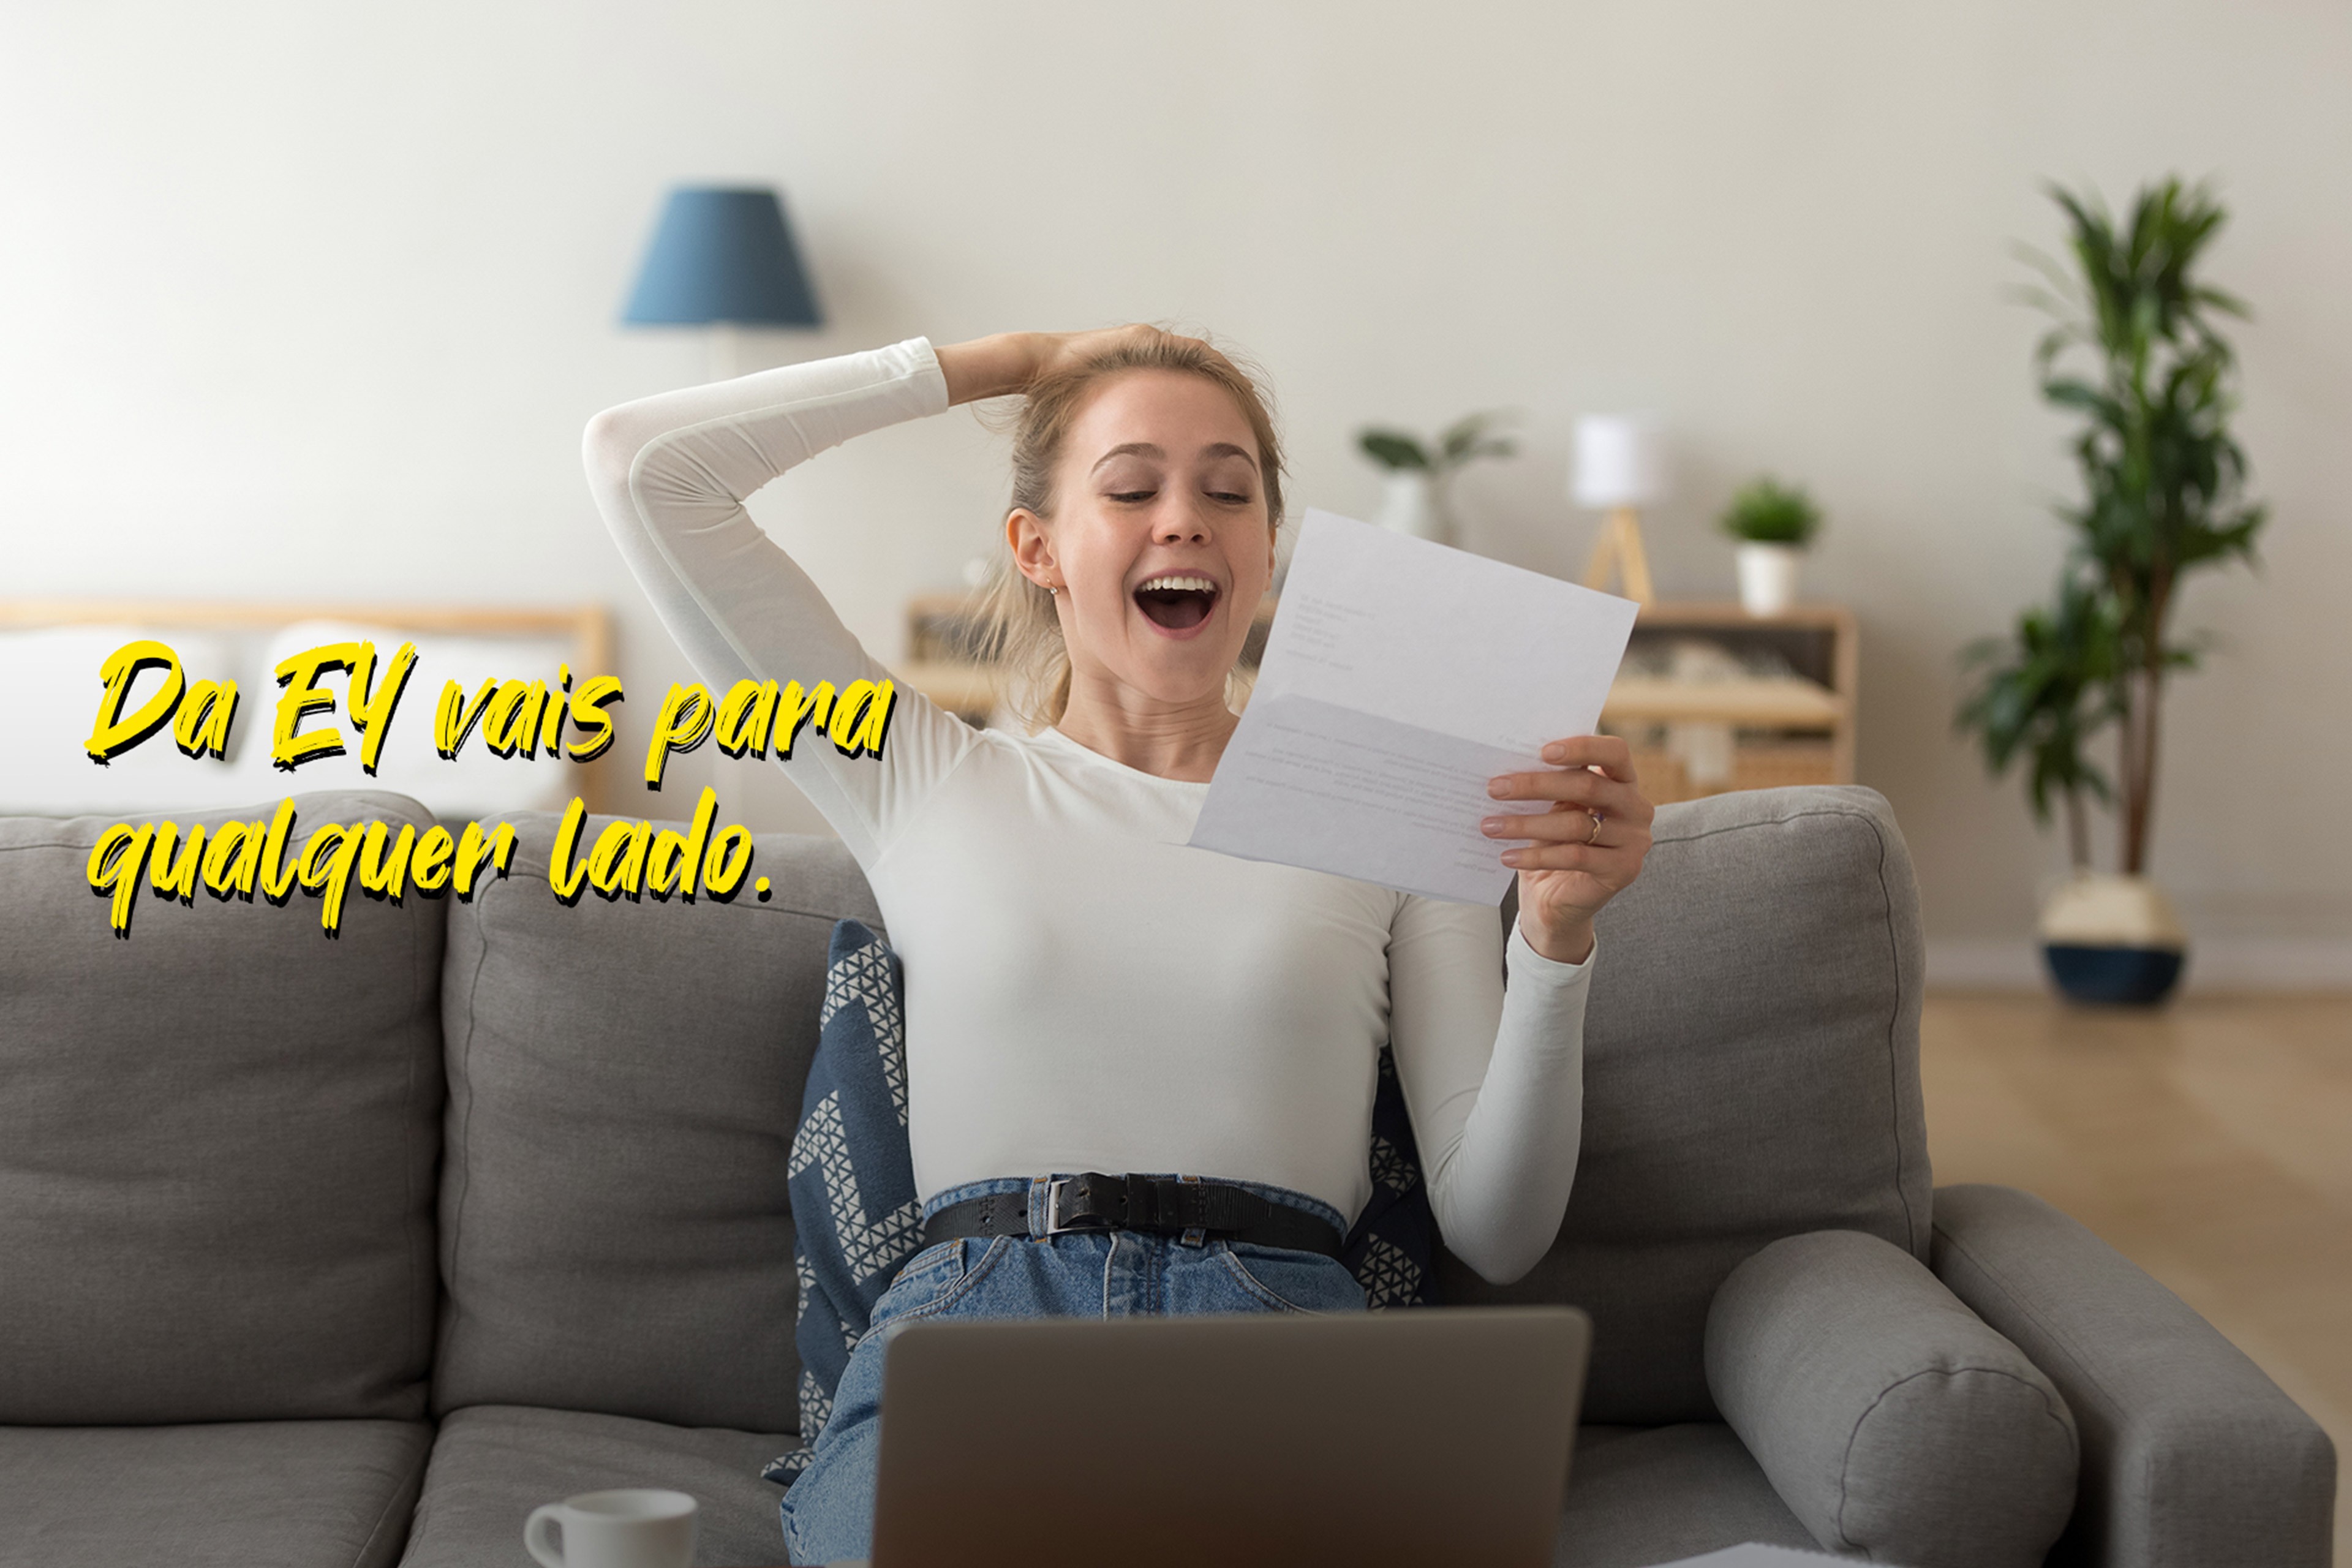 EY woman laughing while holding a letter